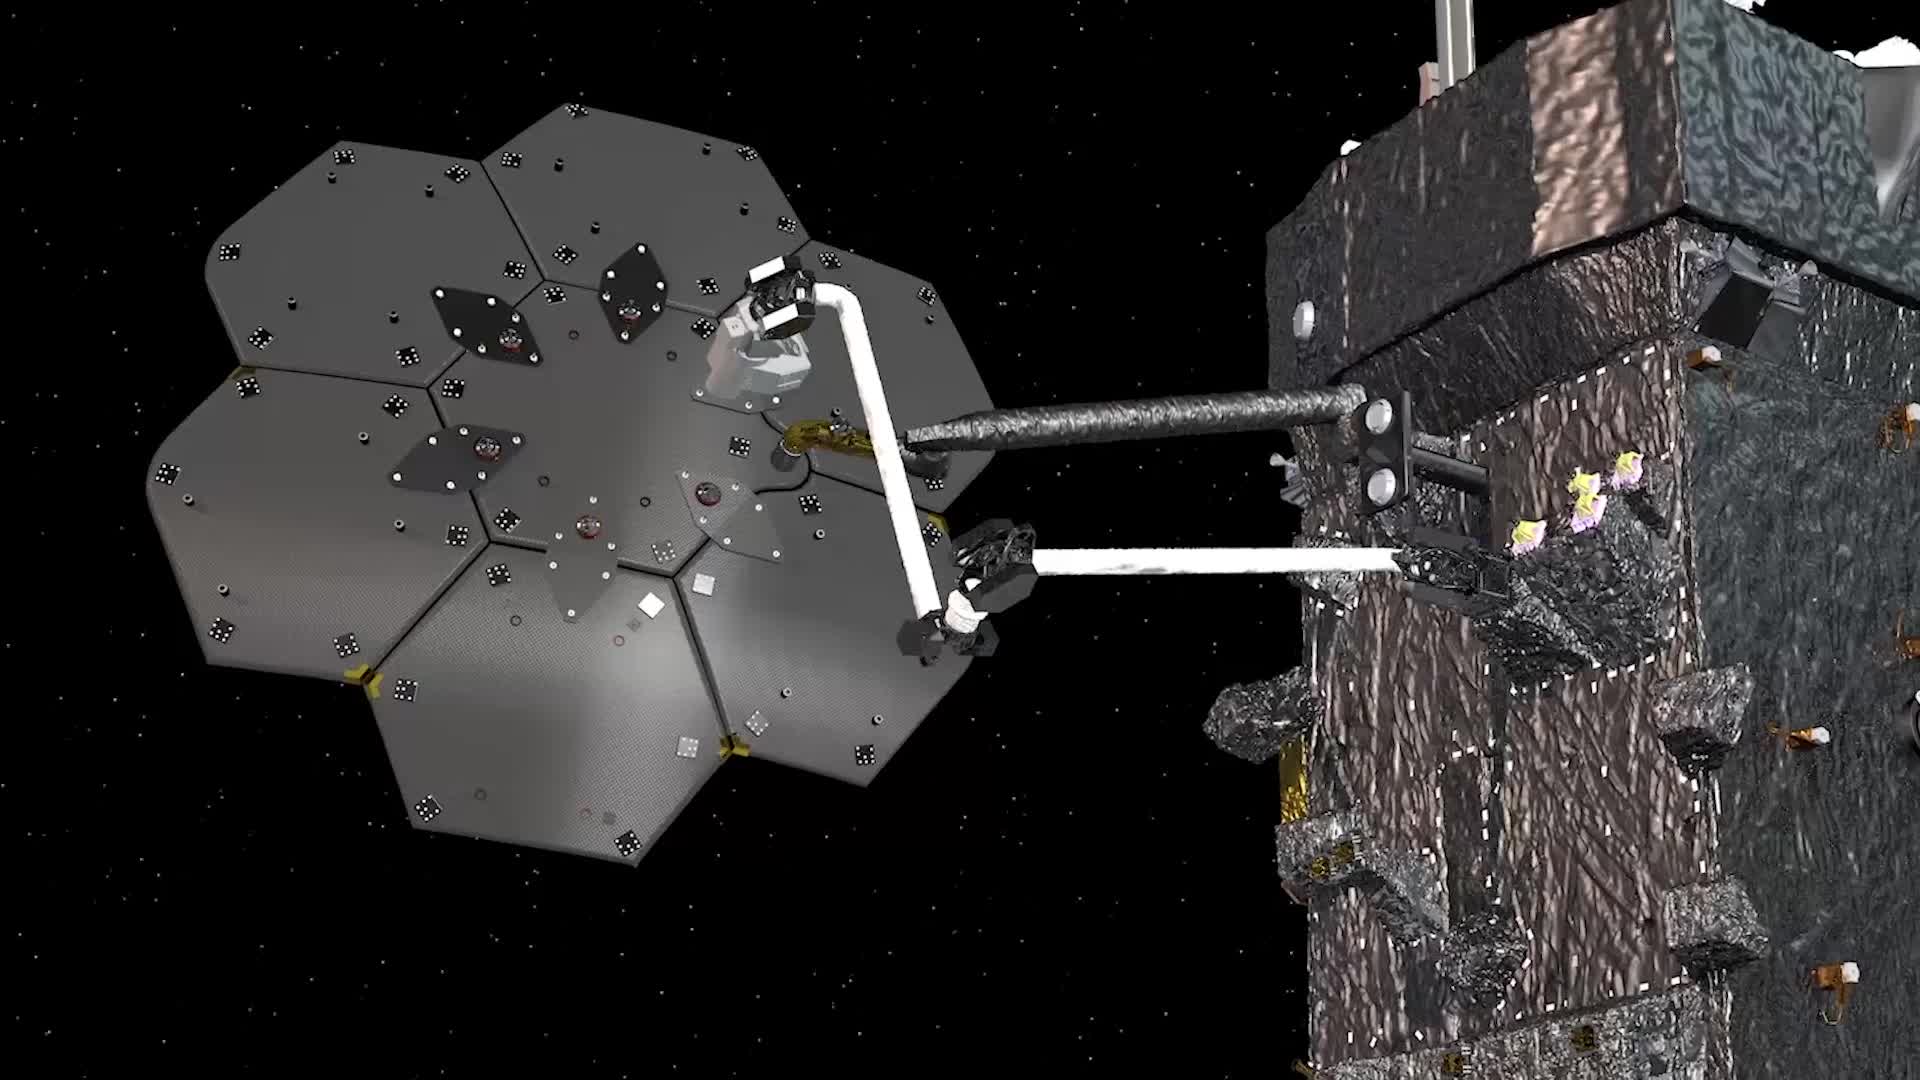 NASA’s plan to build stuff in space just took its first step